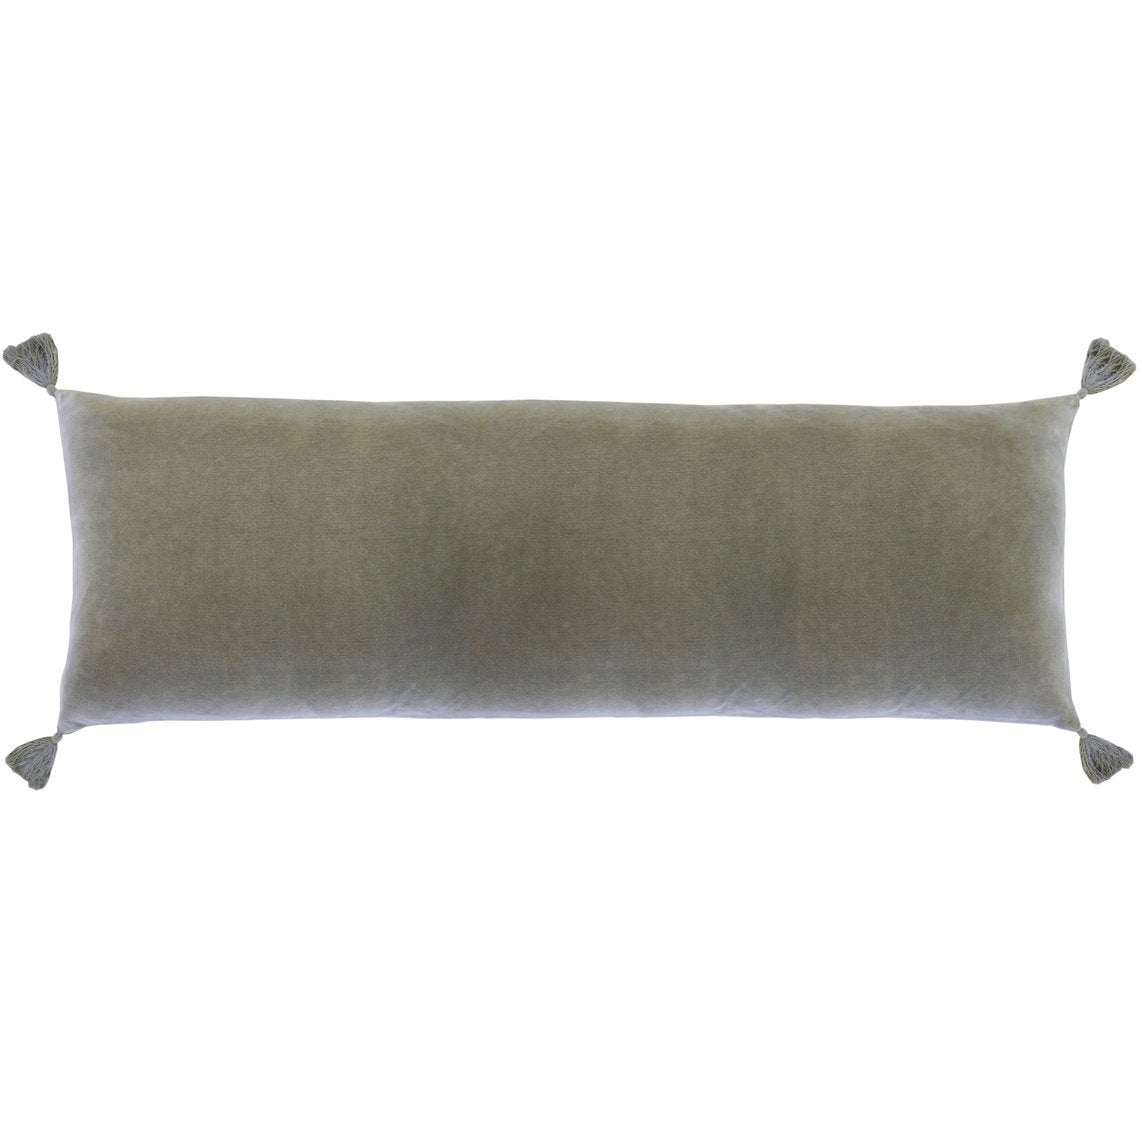 Bianca 14x40 Pillow by Pom at Home